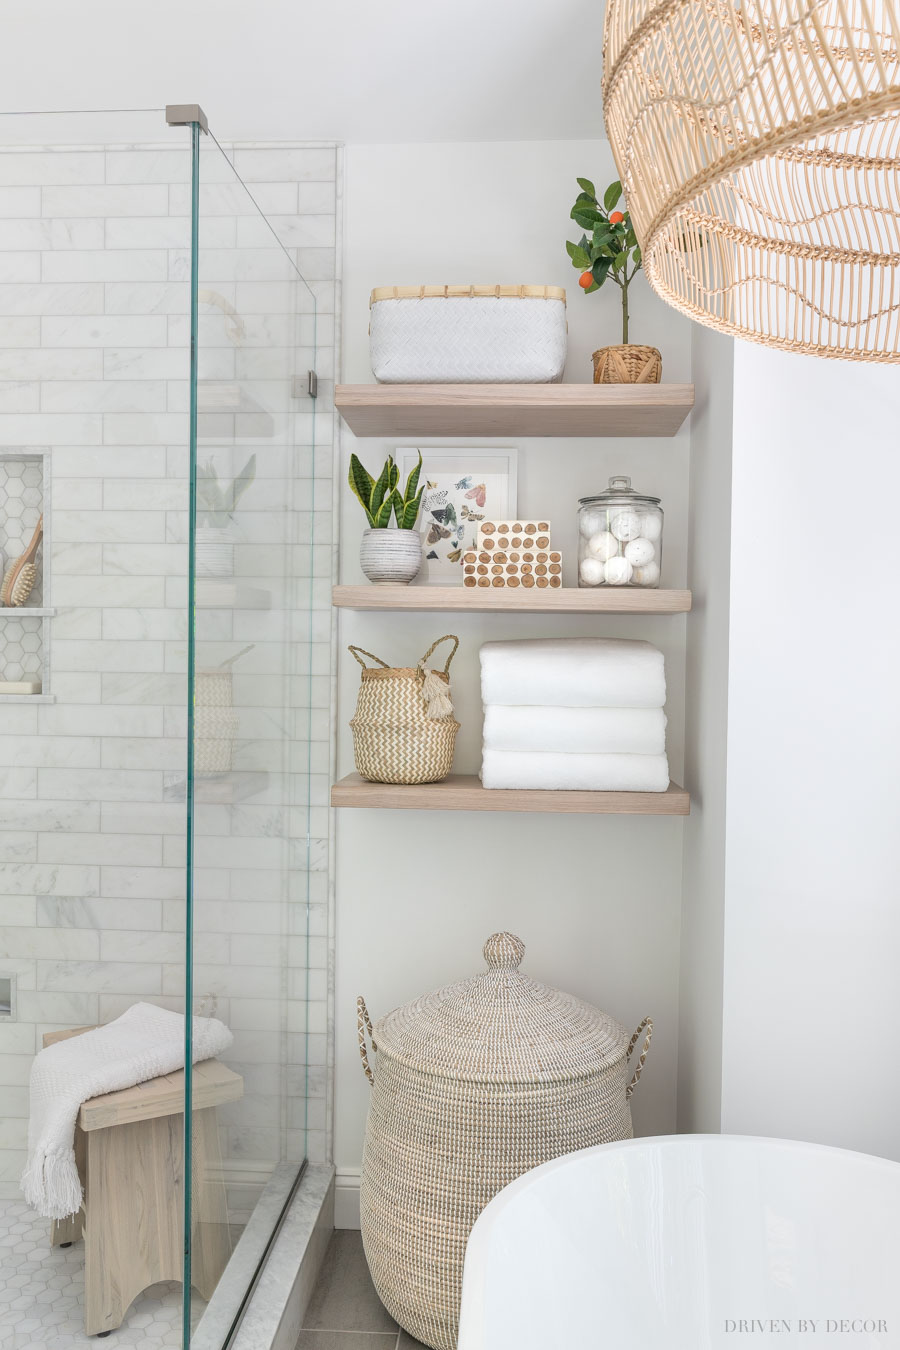 The floating wood shelves in our master bathroom!